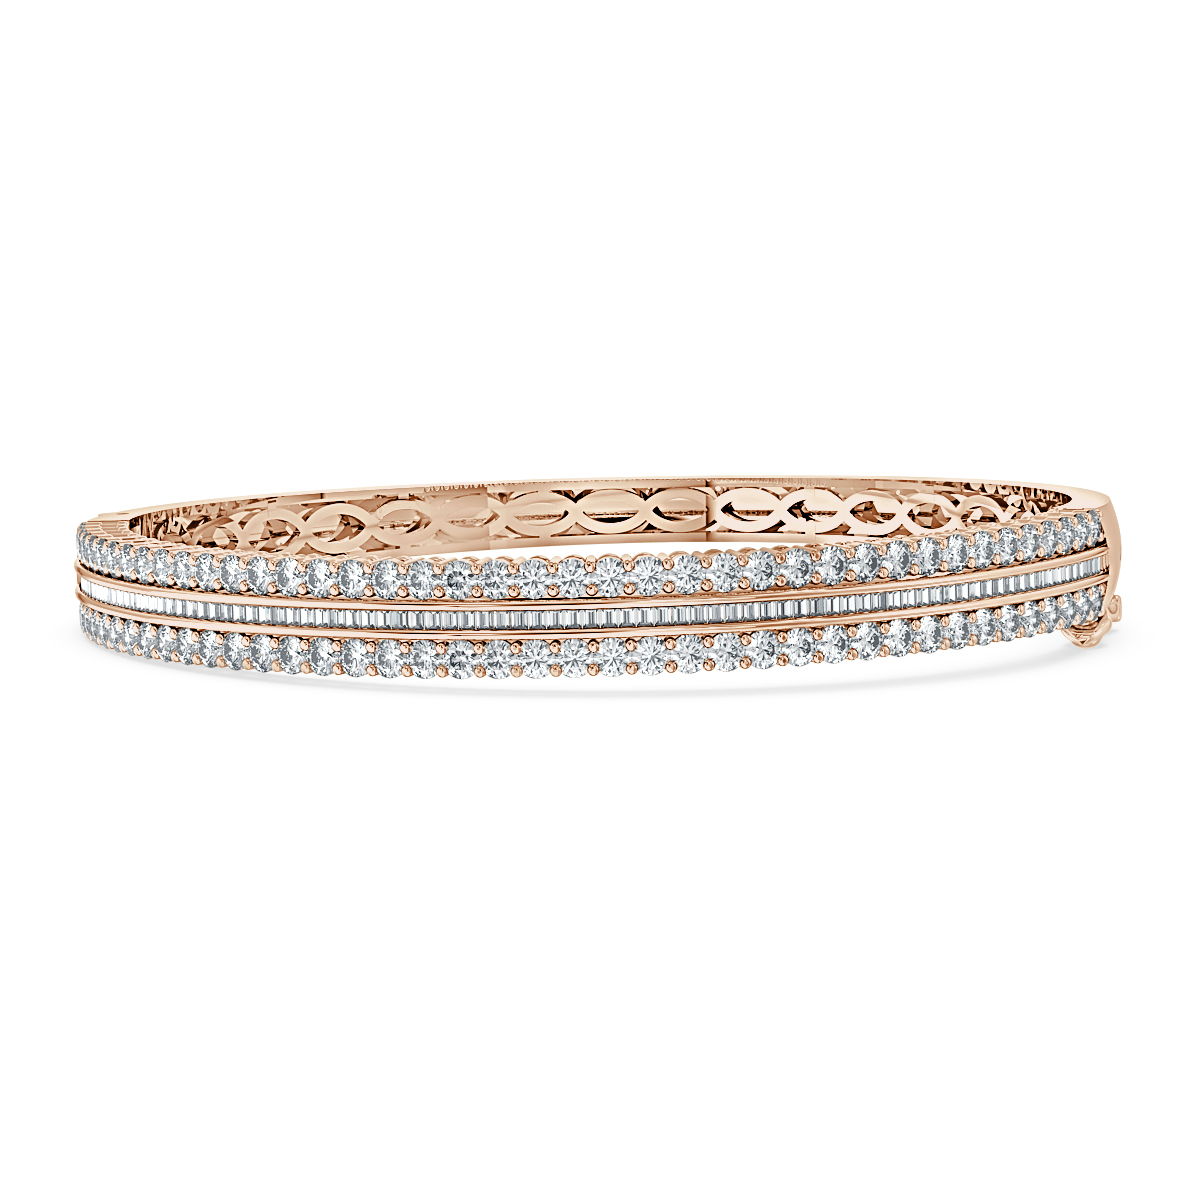 4.50 Ct Round And Bagutte Diamond Bangle, 18K Rose Gold